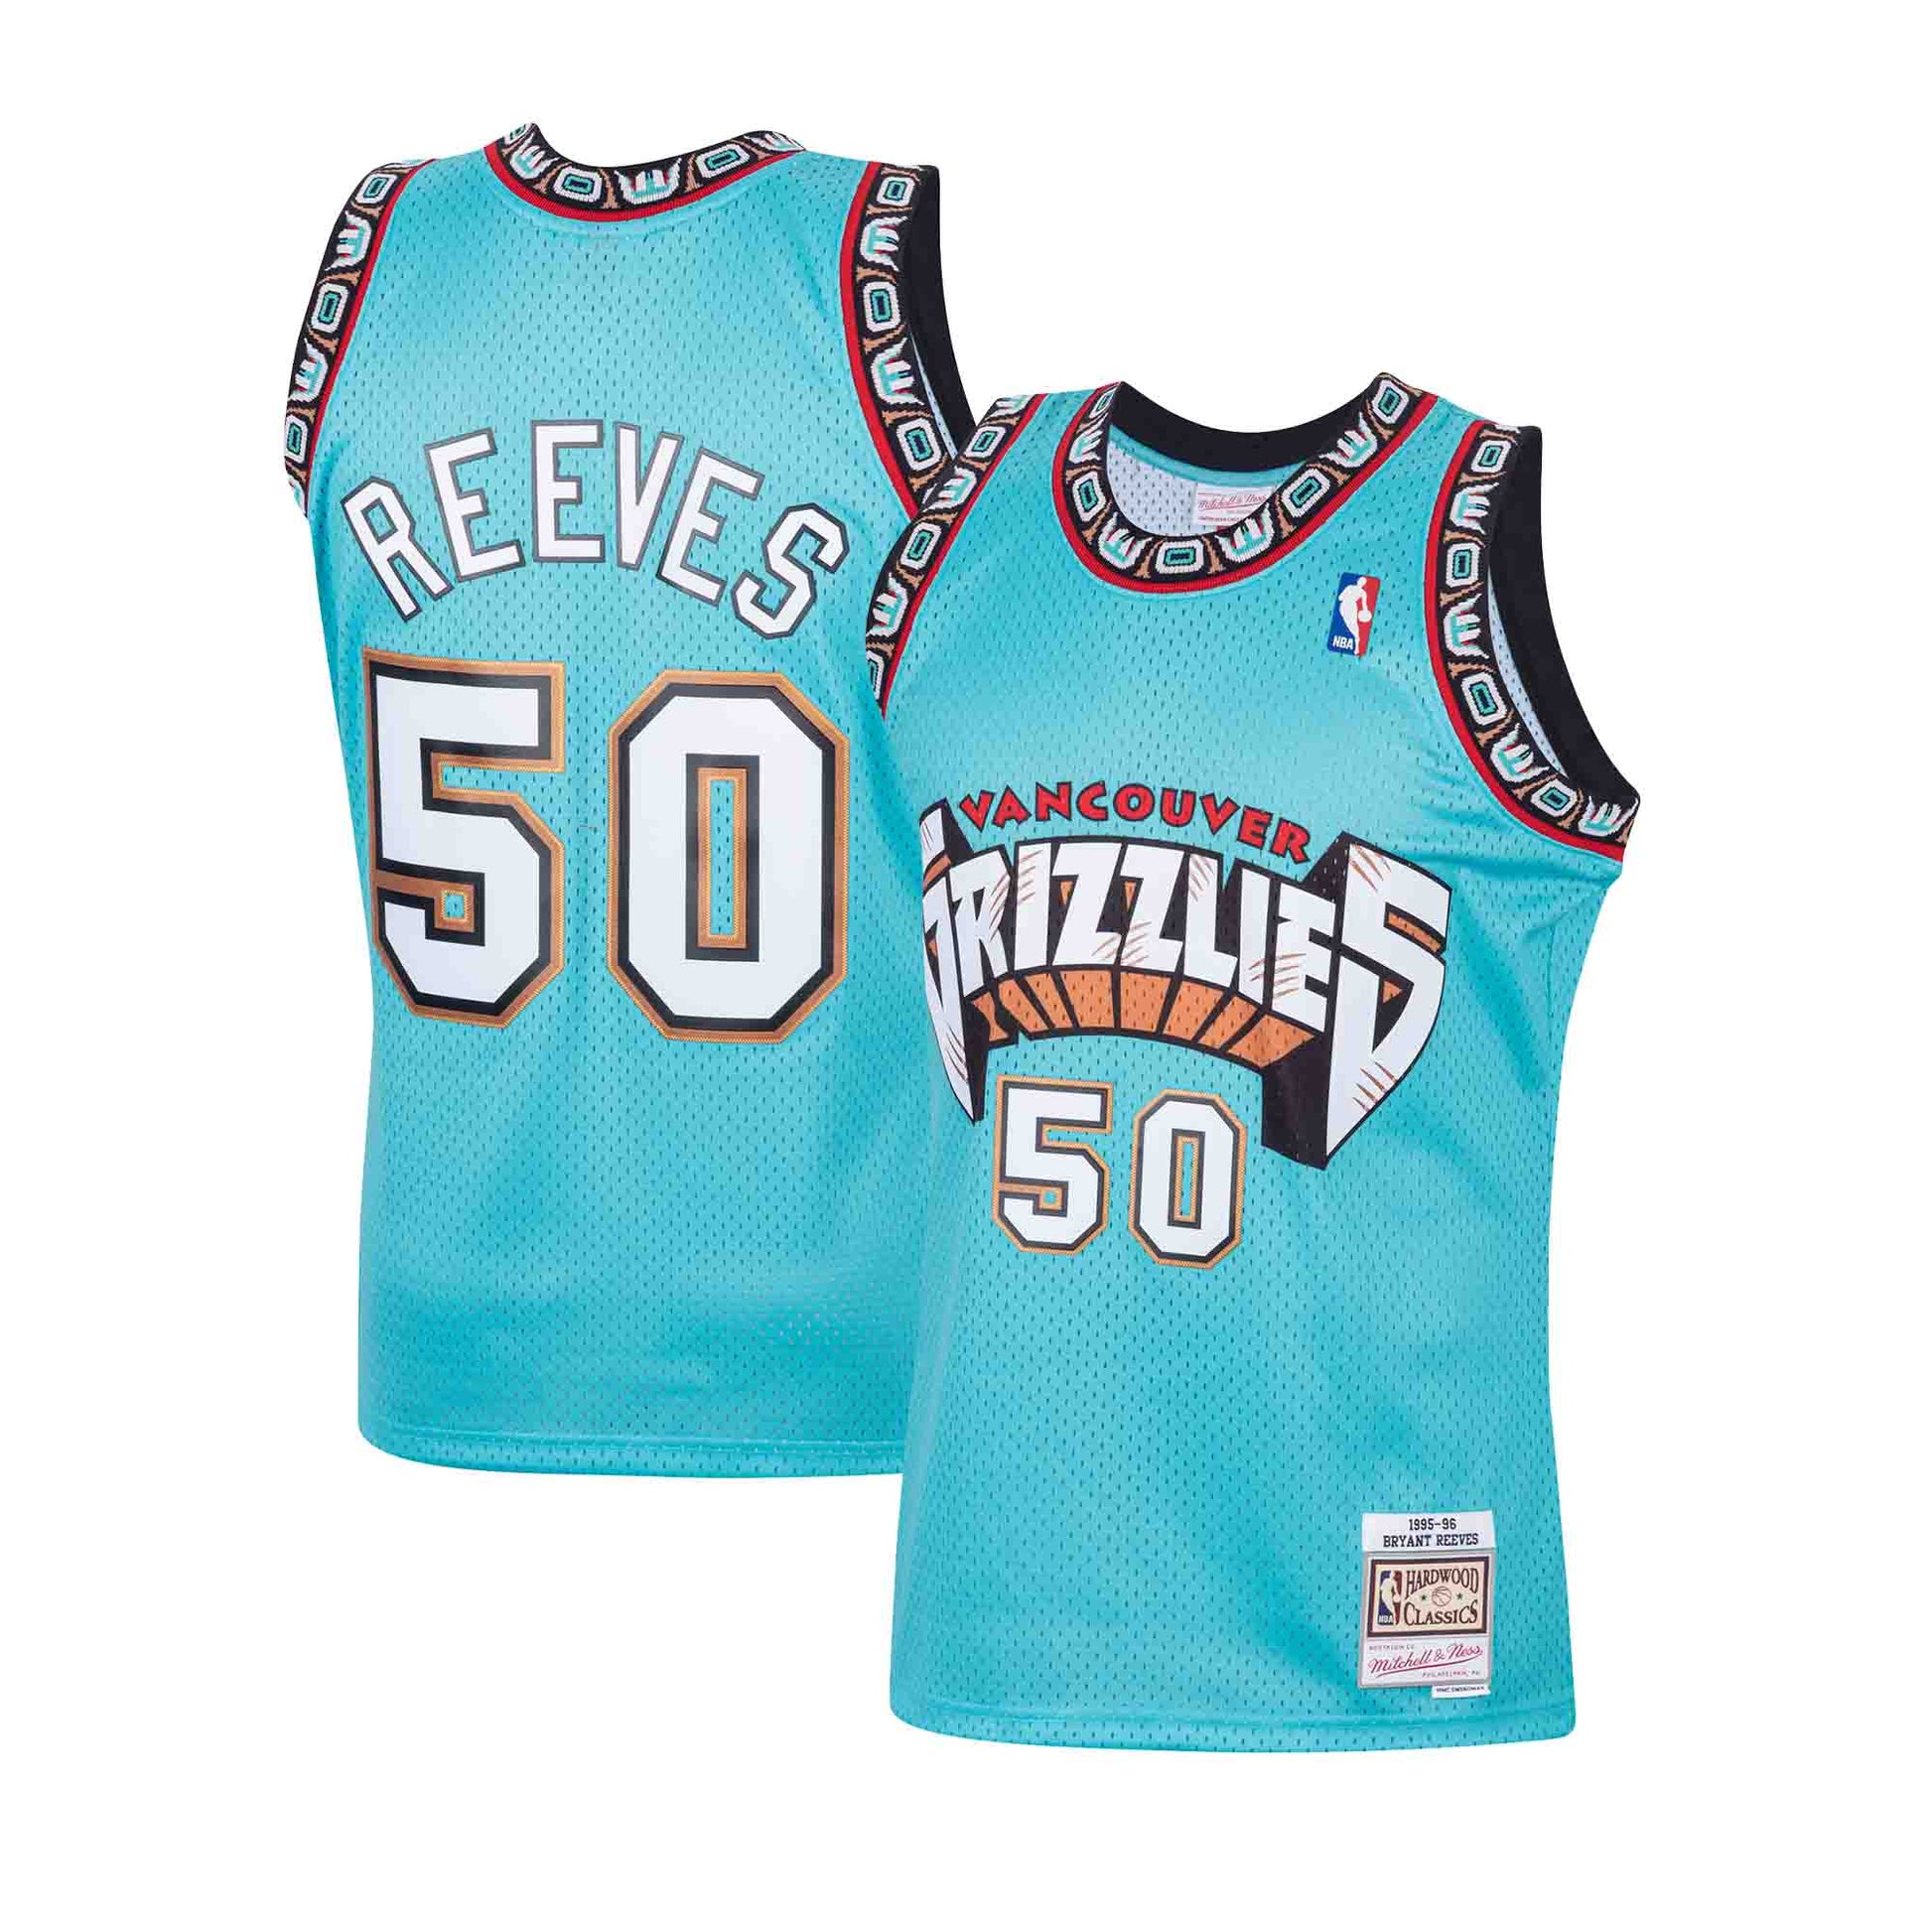 Vintage 1995-96 Bryant Reeves Vancouver Grizzlies Champion Jersey size 54